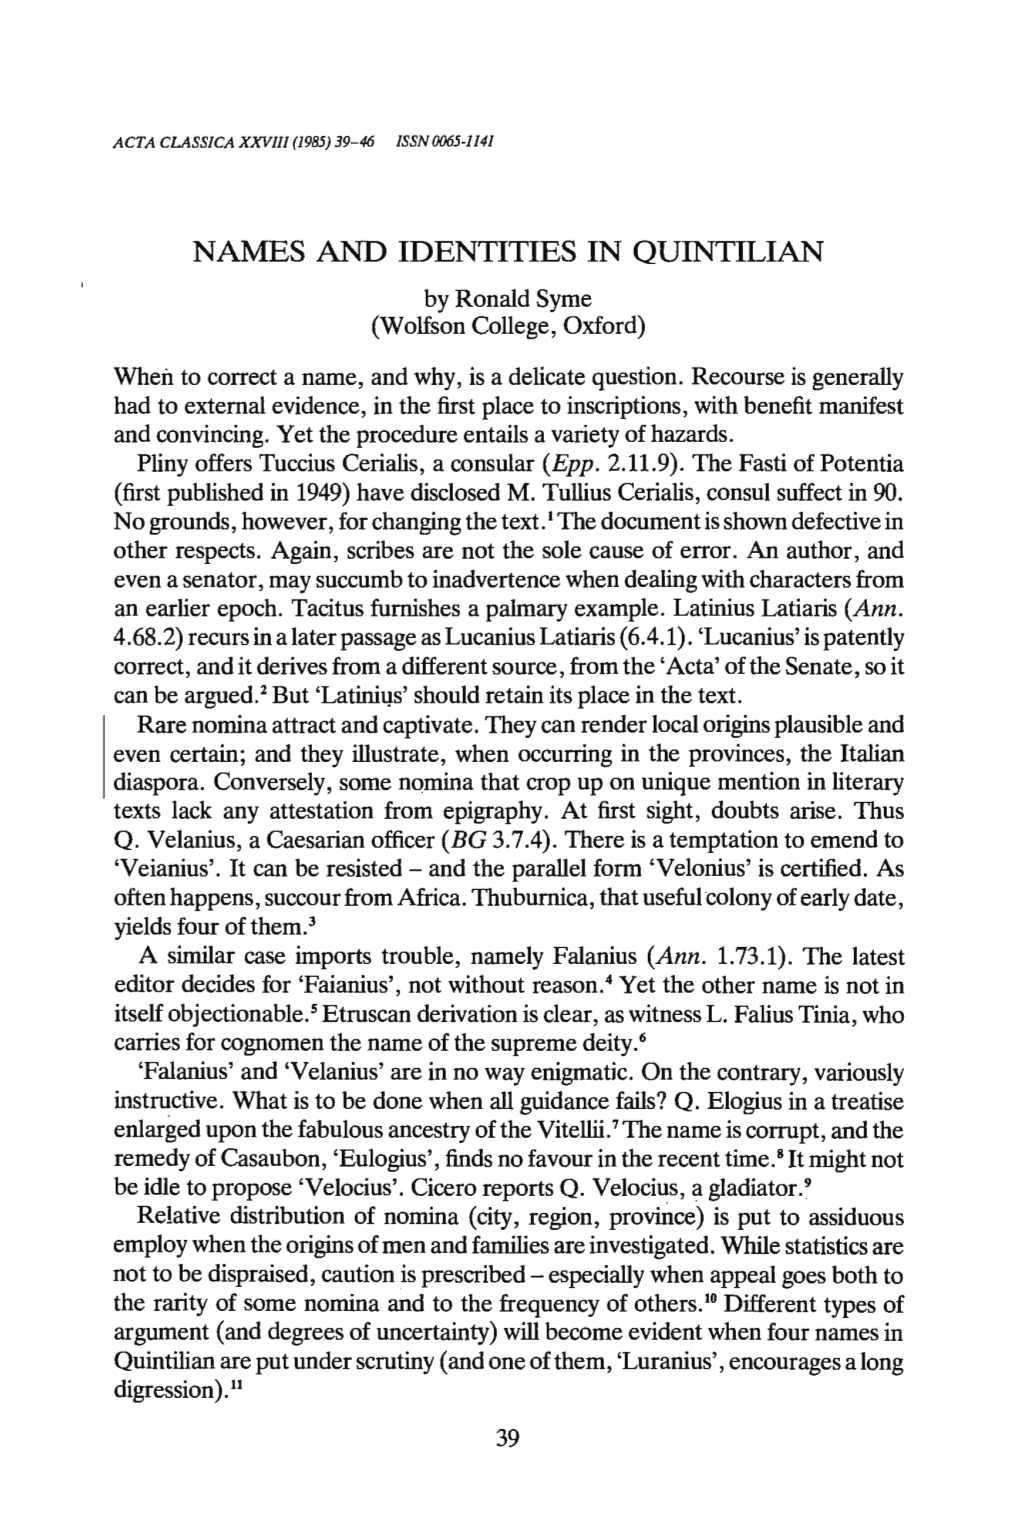 NAMES and IDENTITIES in QUINTILIAN by Ronald Syme (Wolfson College, Oxford)